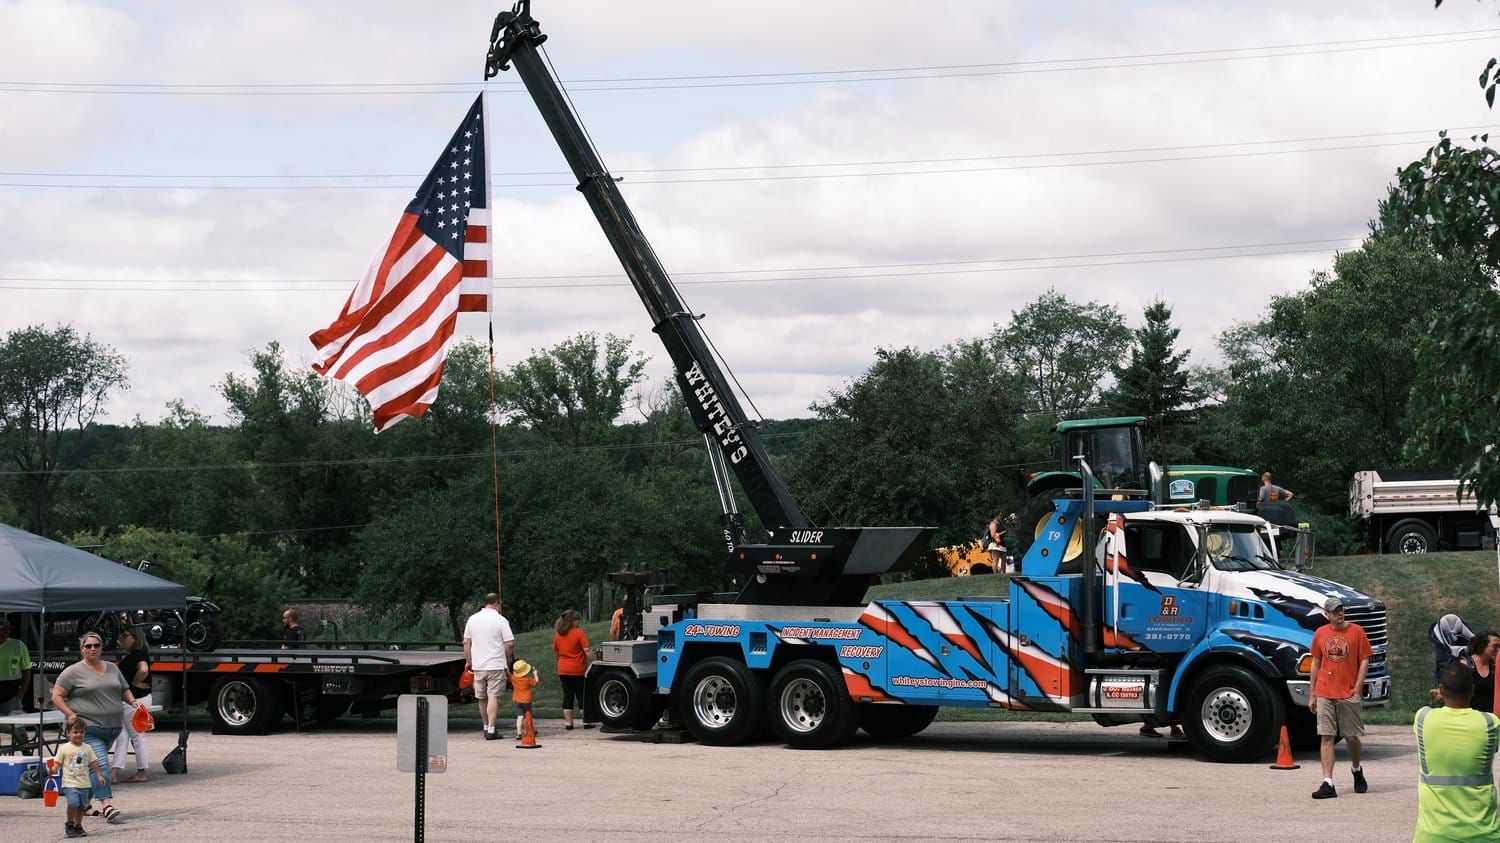 Heavy duty tow truck flying a large American flag.